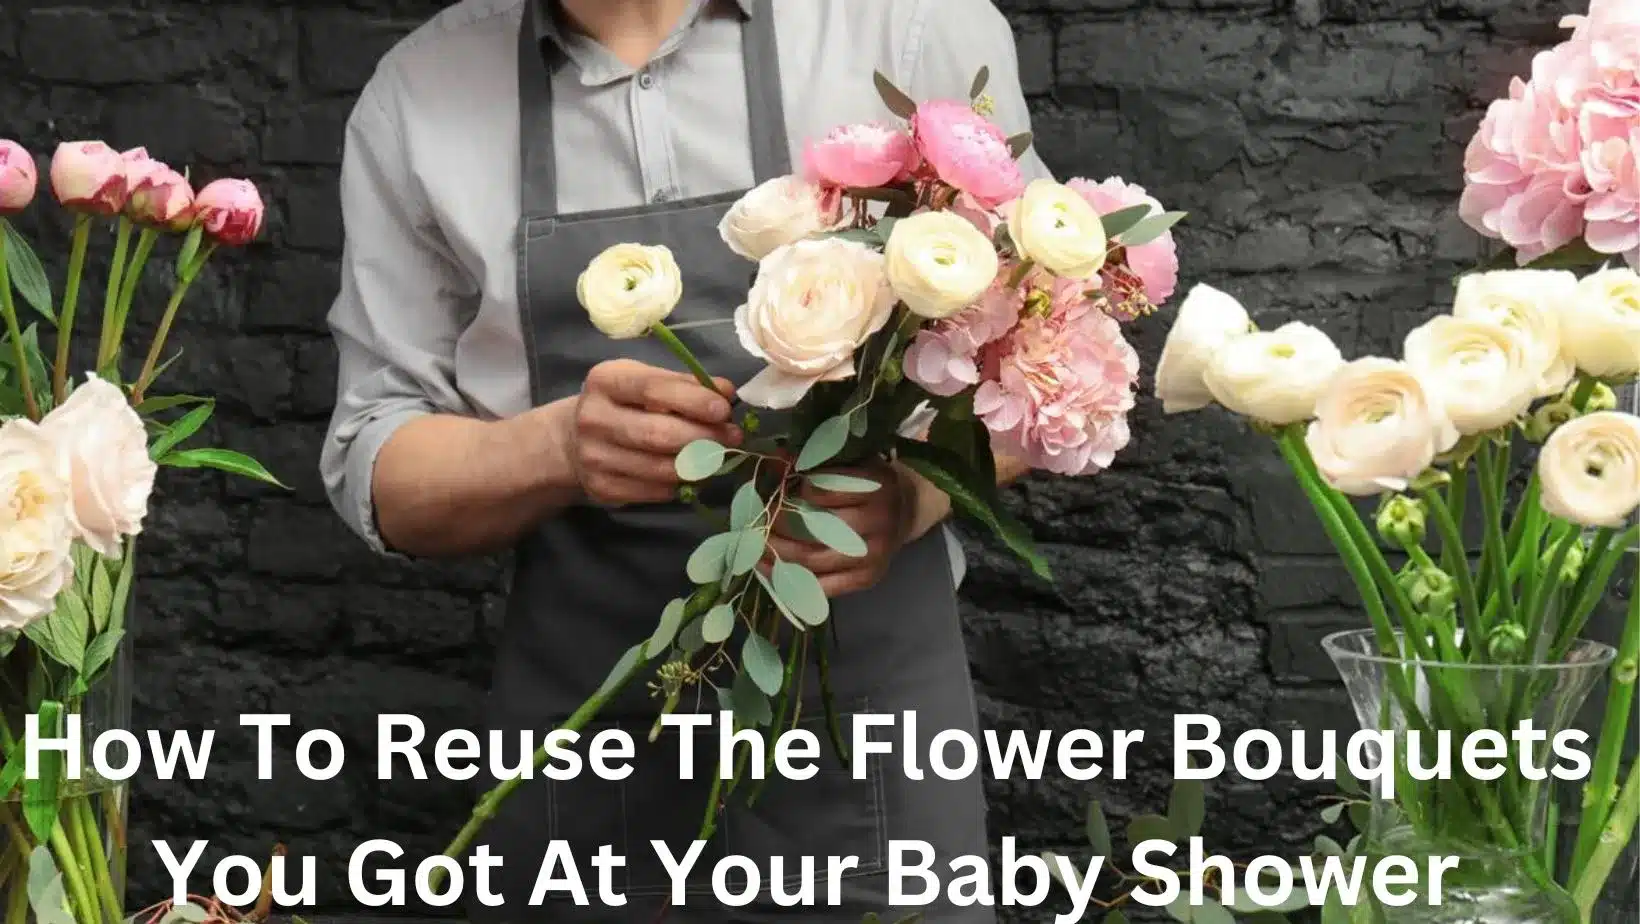 How To Reuse The Flower Bouquets You Got At Your Baby Shower